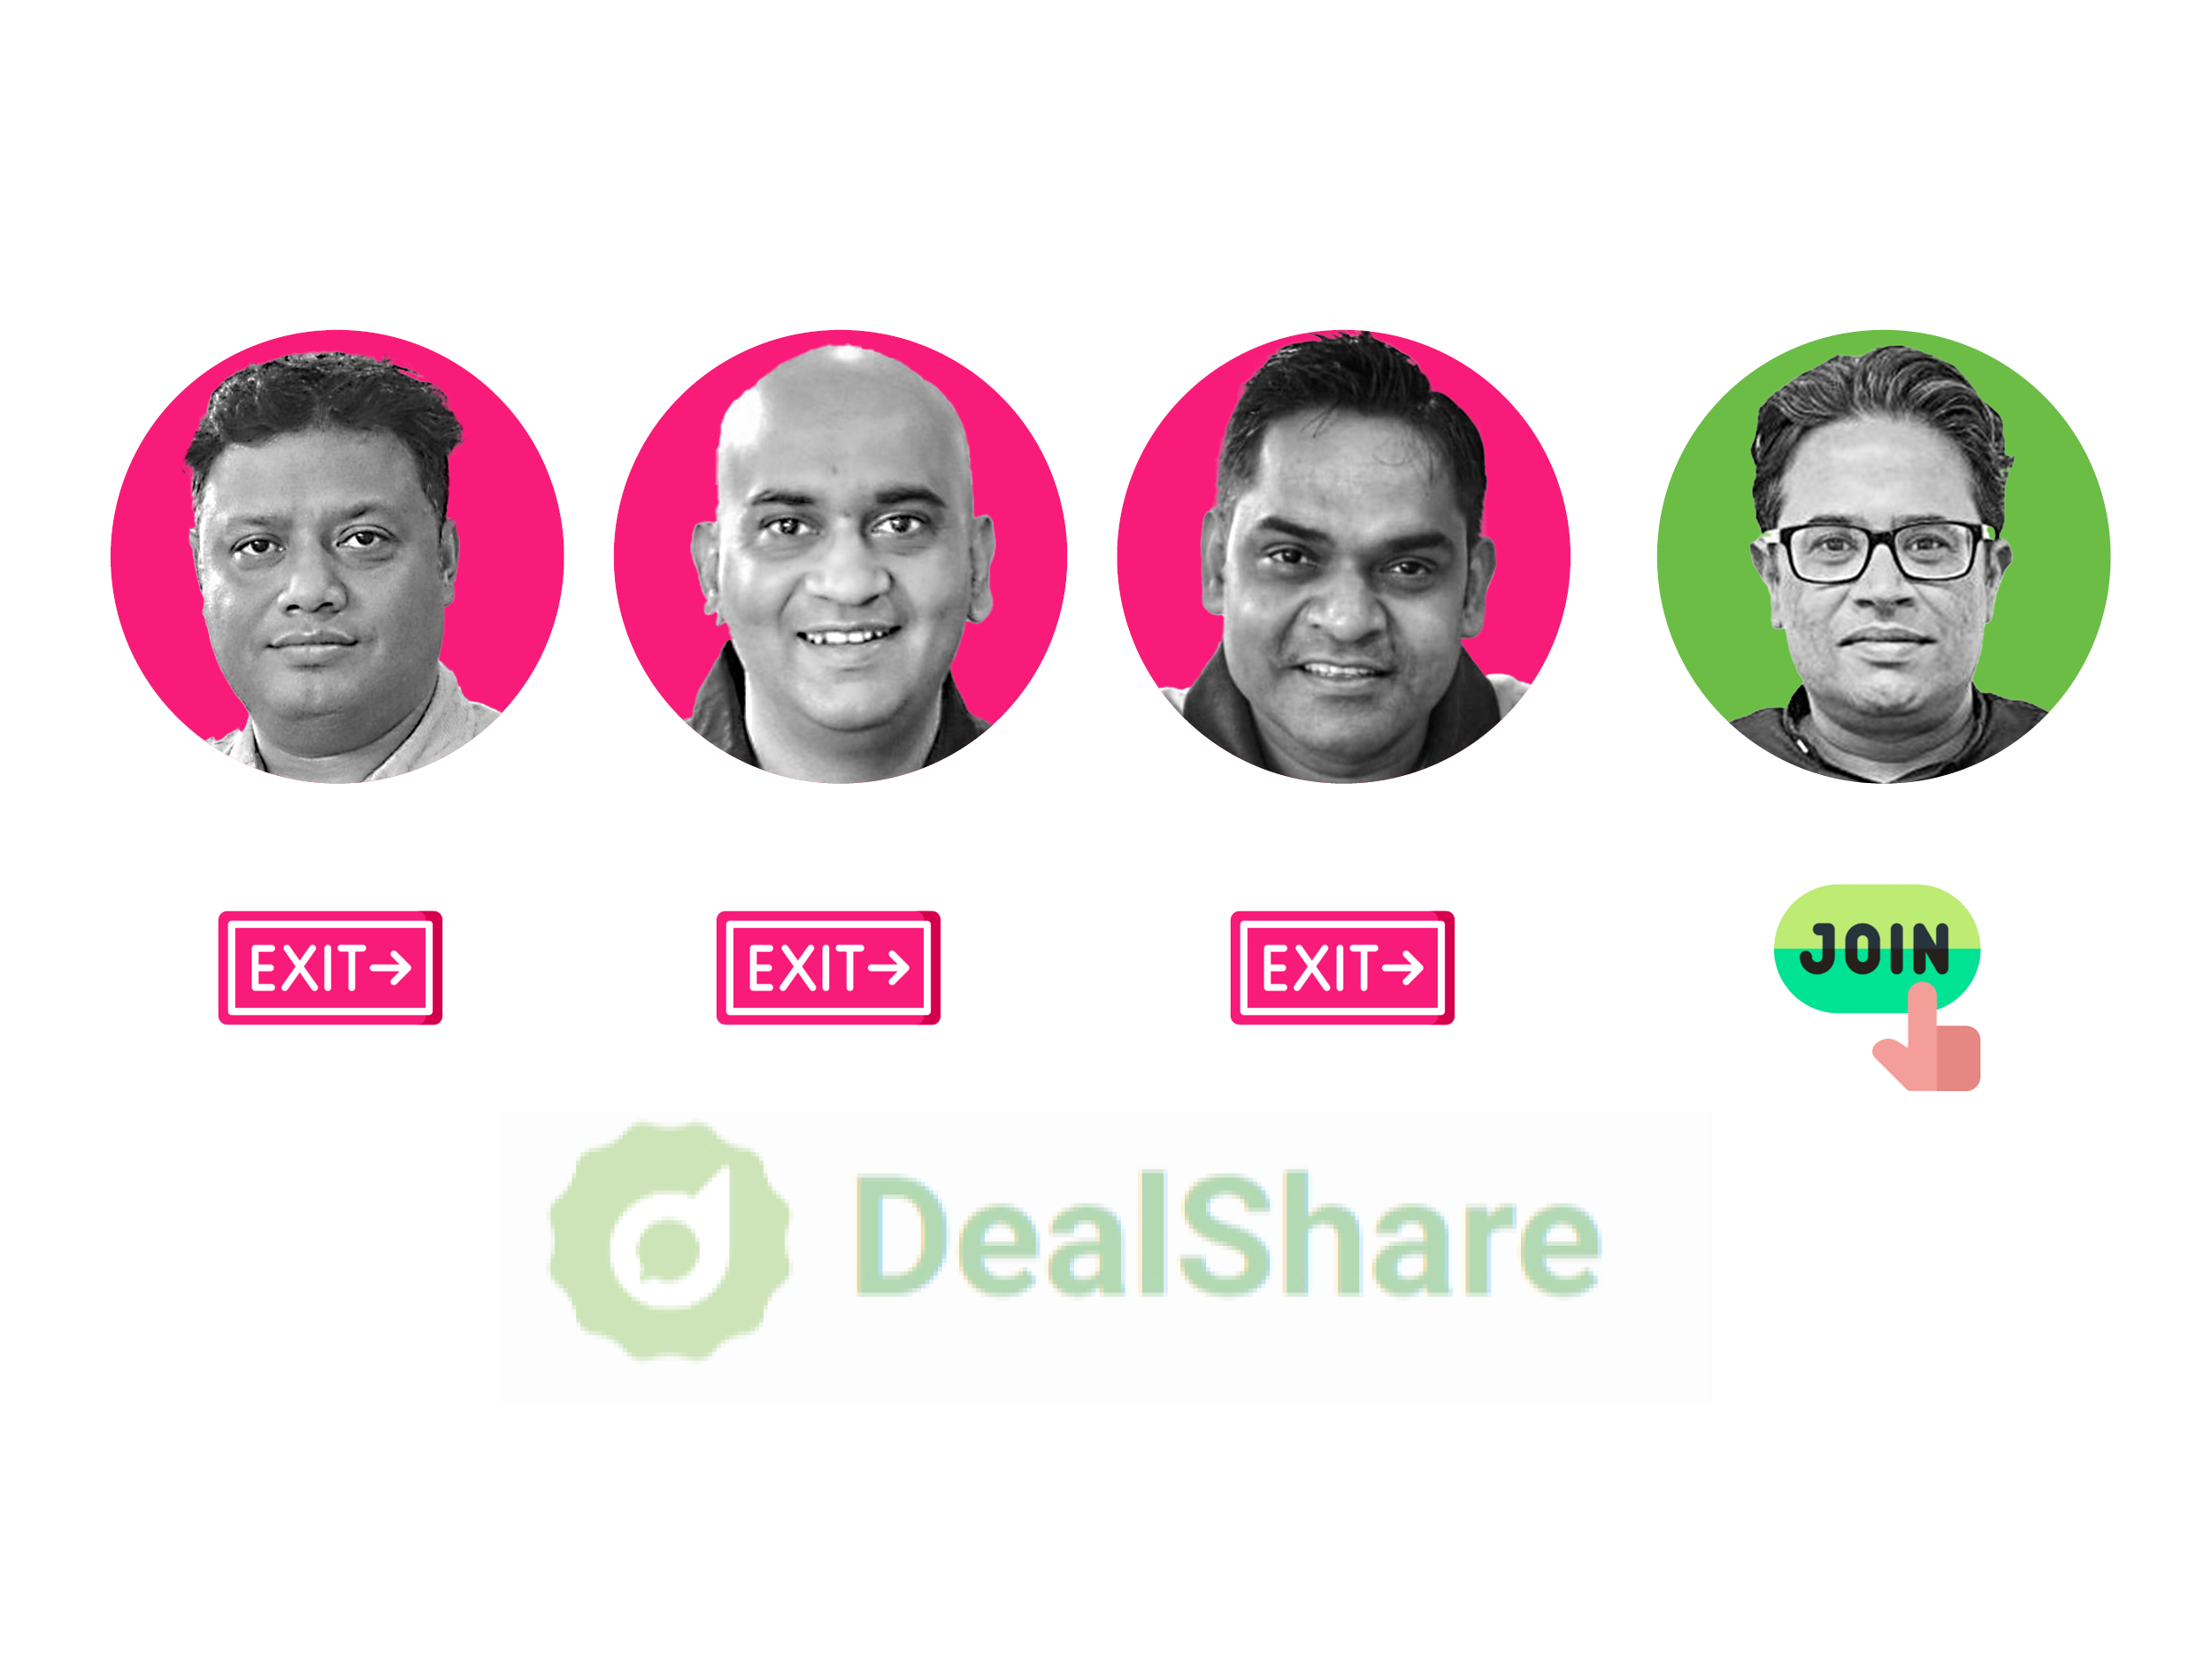 DEALSHARE FOUNDER QUITs